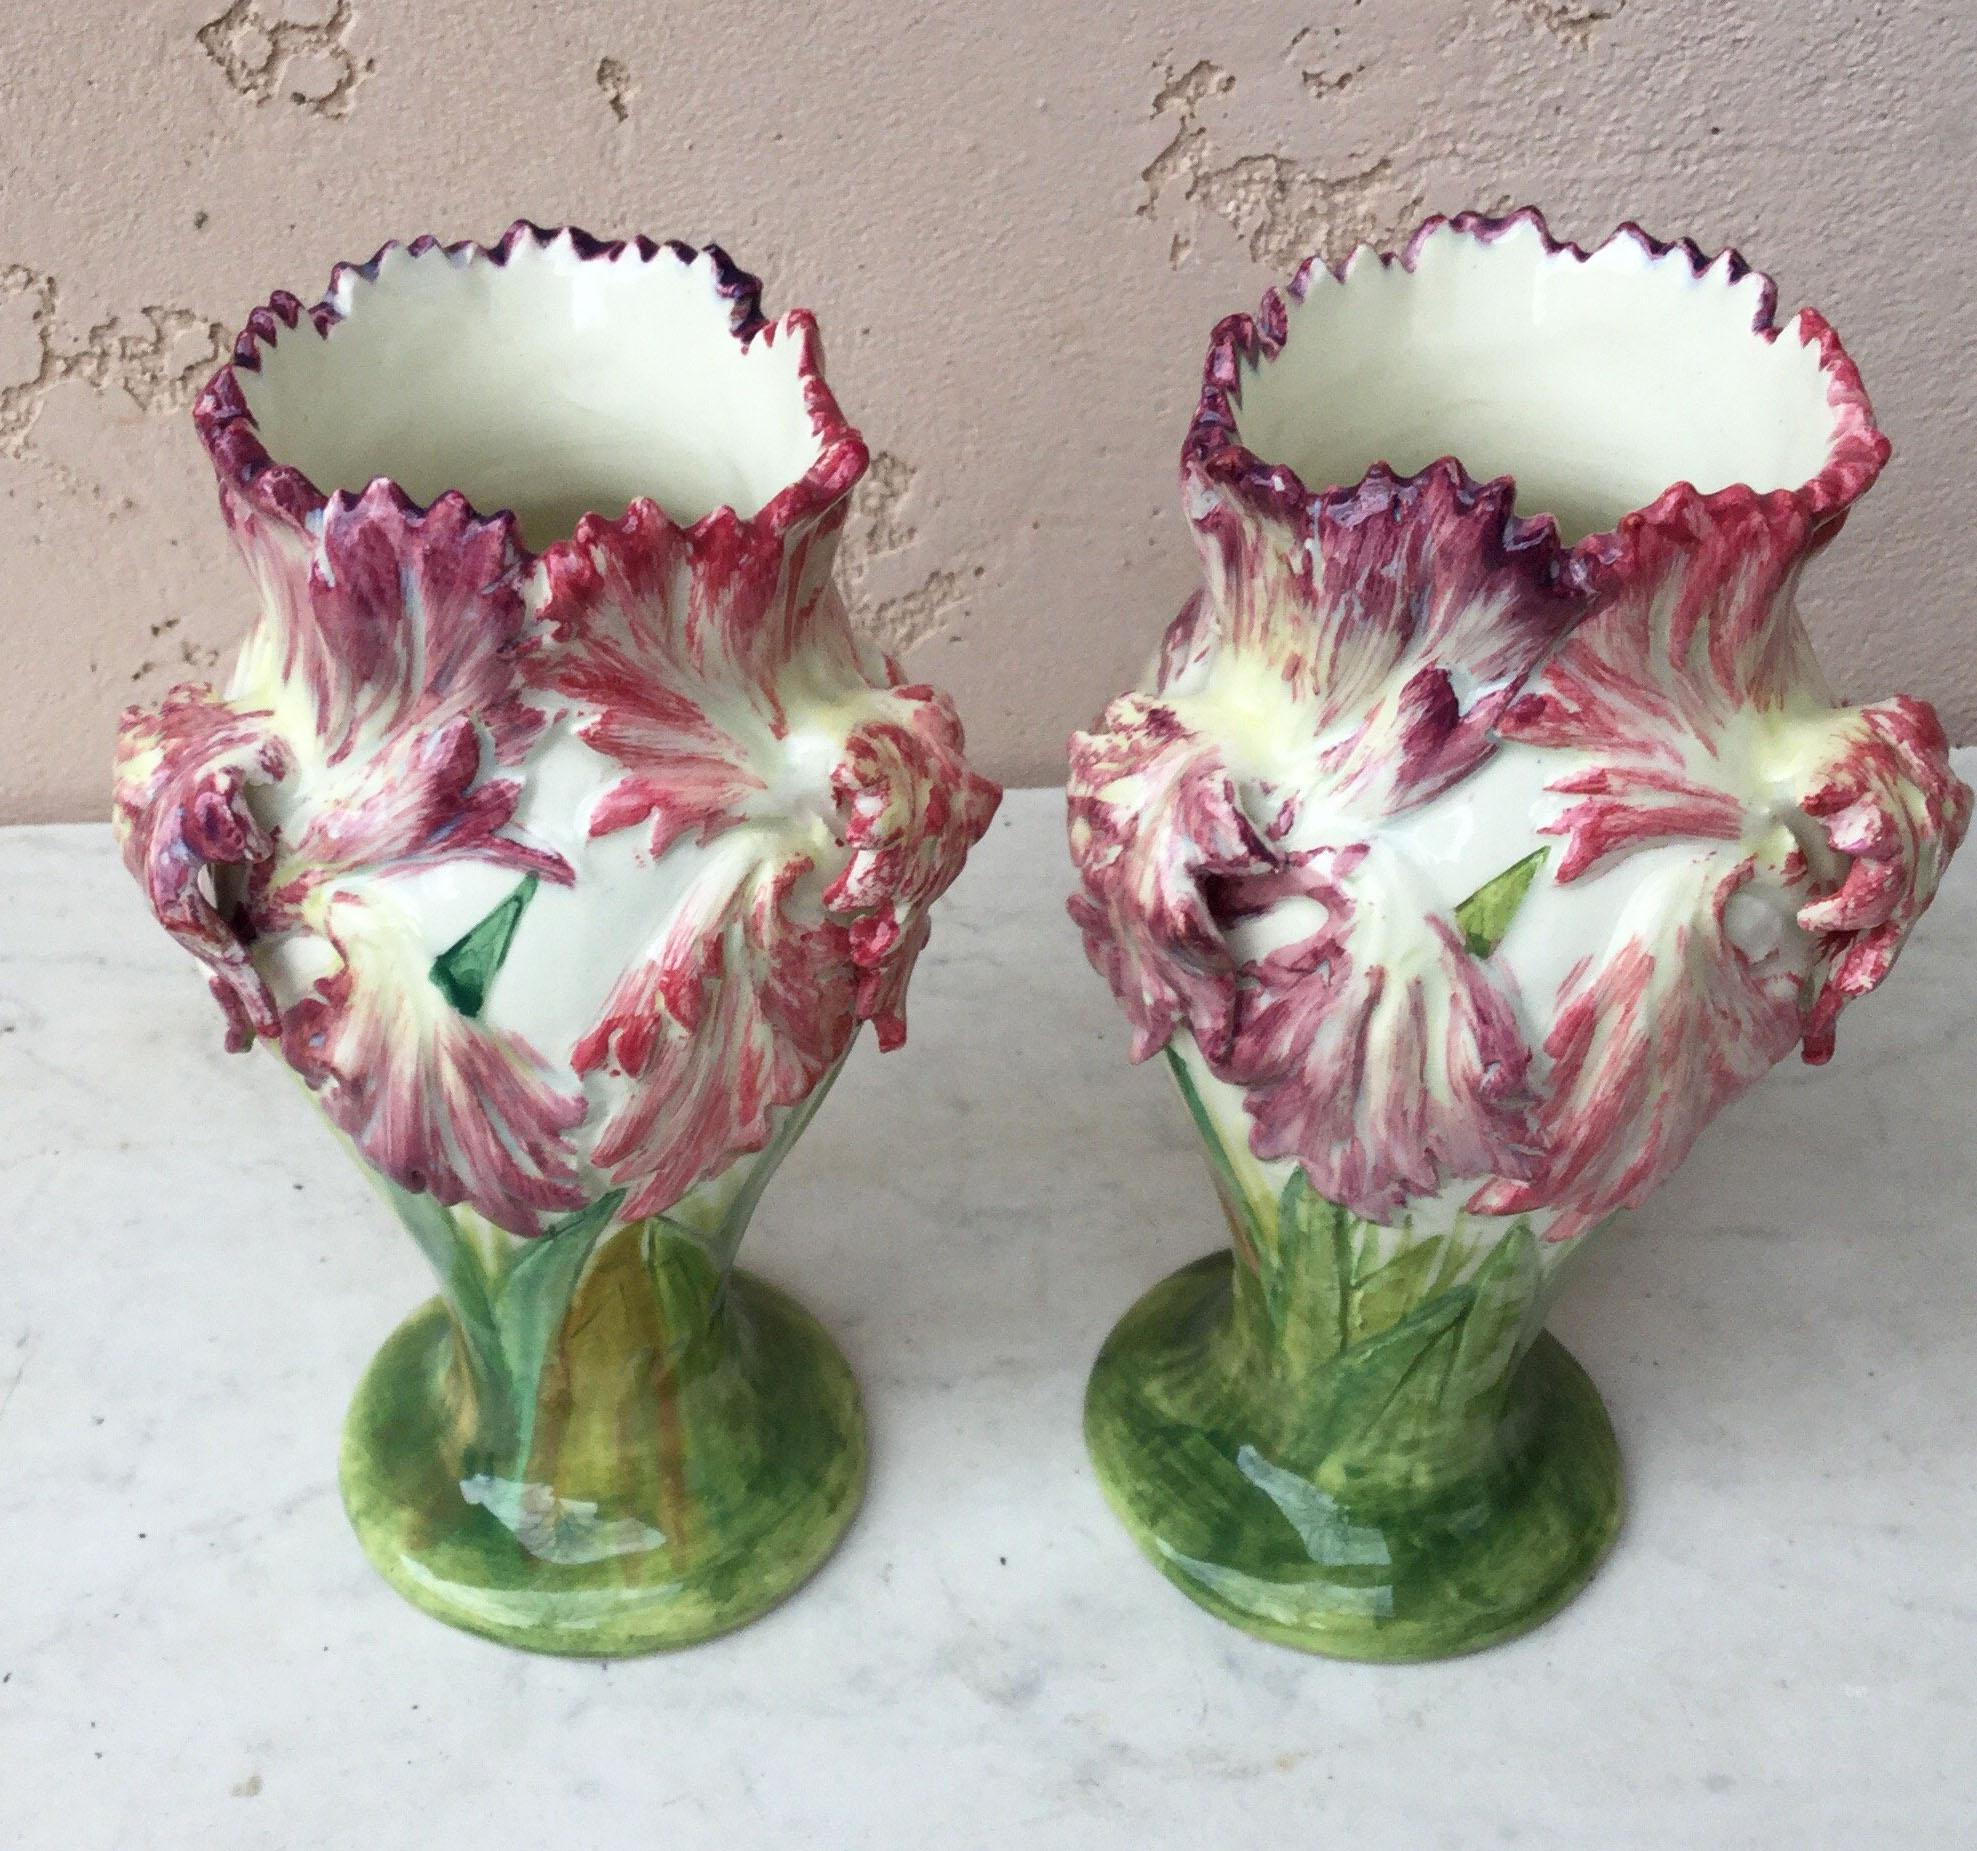 Pair of Majolica pink and purple fringed tulips vases signed Delphin Massier, circa 1880.